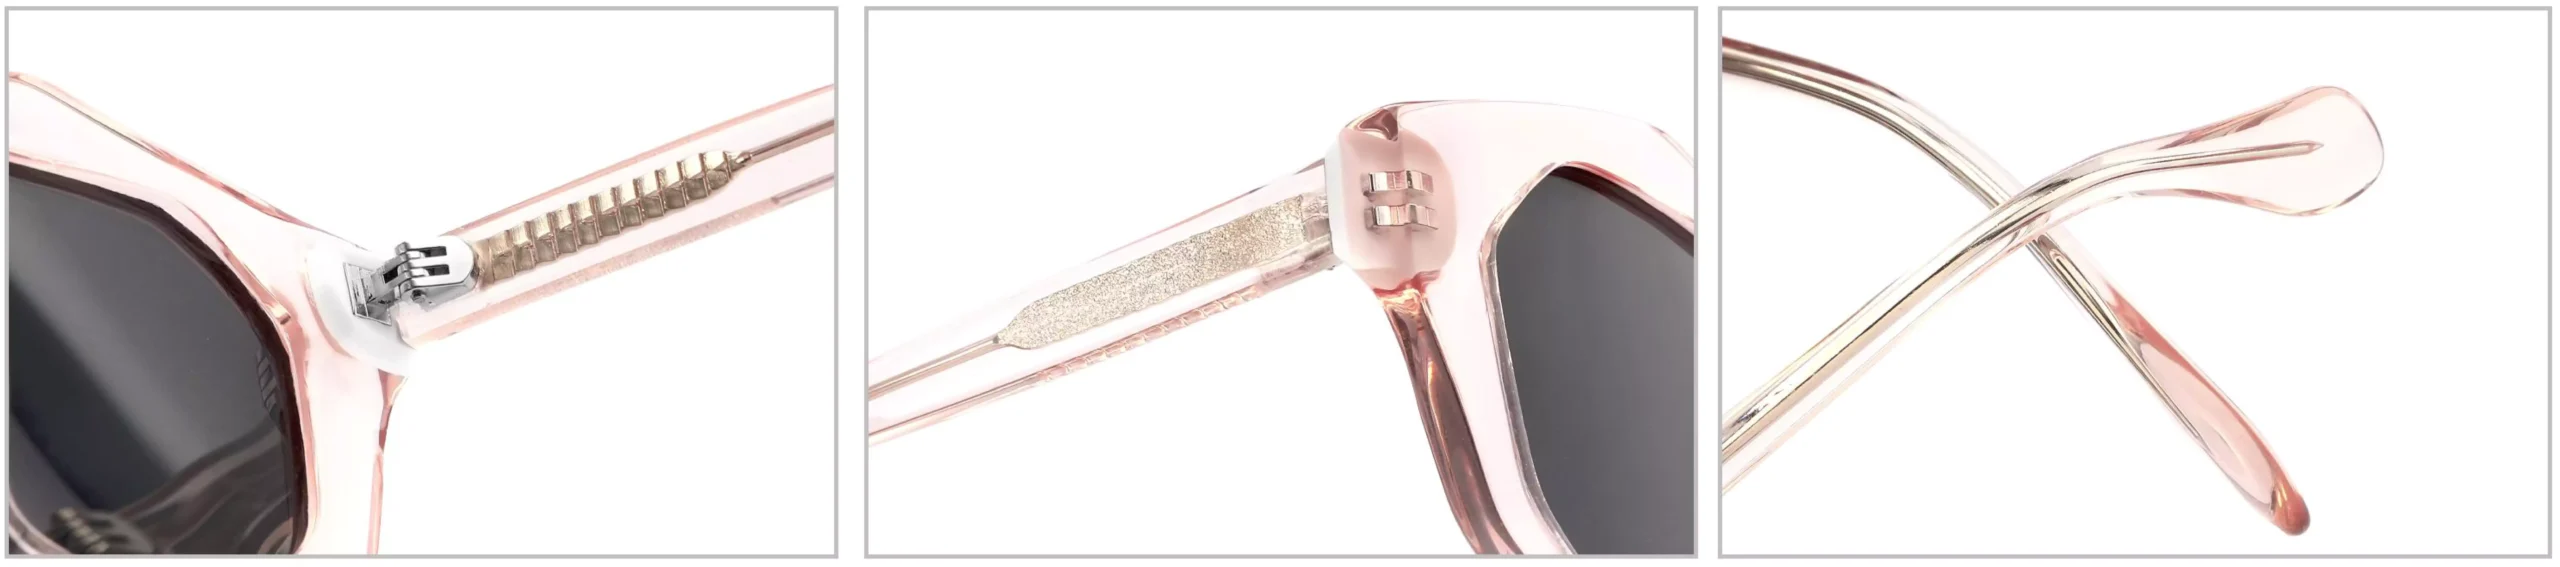 Sunglasses YD1207T Detail Shooting, include temple, temple tips, hinge, endpieces, wire cores, rivets